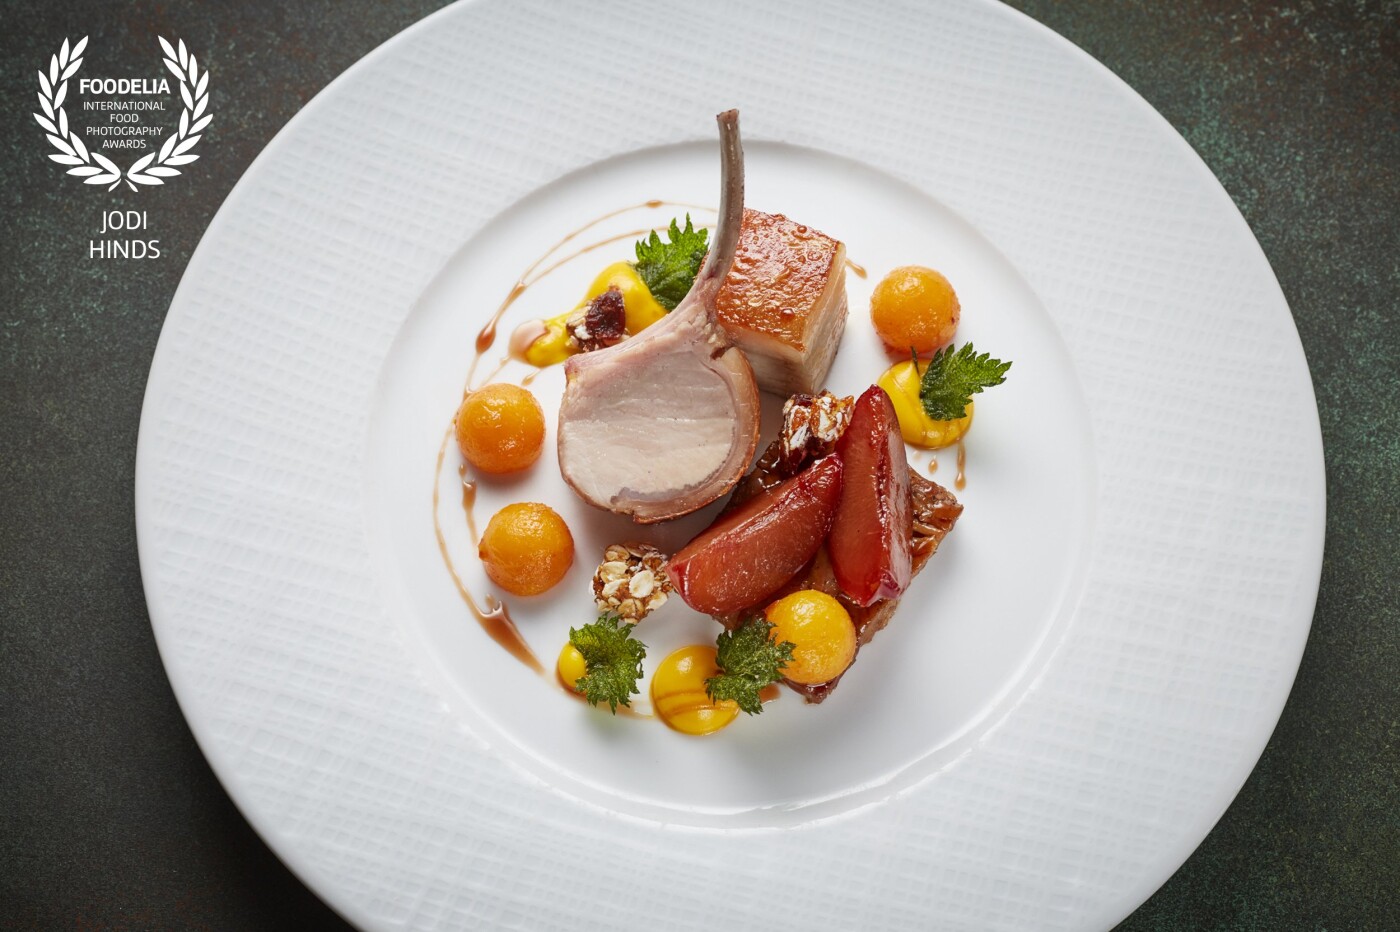 Gorgeous fresh spring dish from Ross Bryan at Corrigans, Mayfair.  This pork dish is full of incredible twists of flavours from the baked plums to the muesli balls. Really gorgeous..<br />
<br />
Restaurant:@corrigans_mayfair<br />
Owner: @chefcorrigan<br />
Chef: @rosspotsnpans<br />
Photographer: @jodihindsphoto